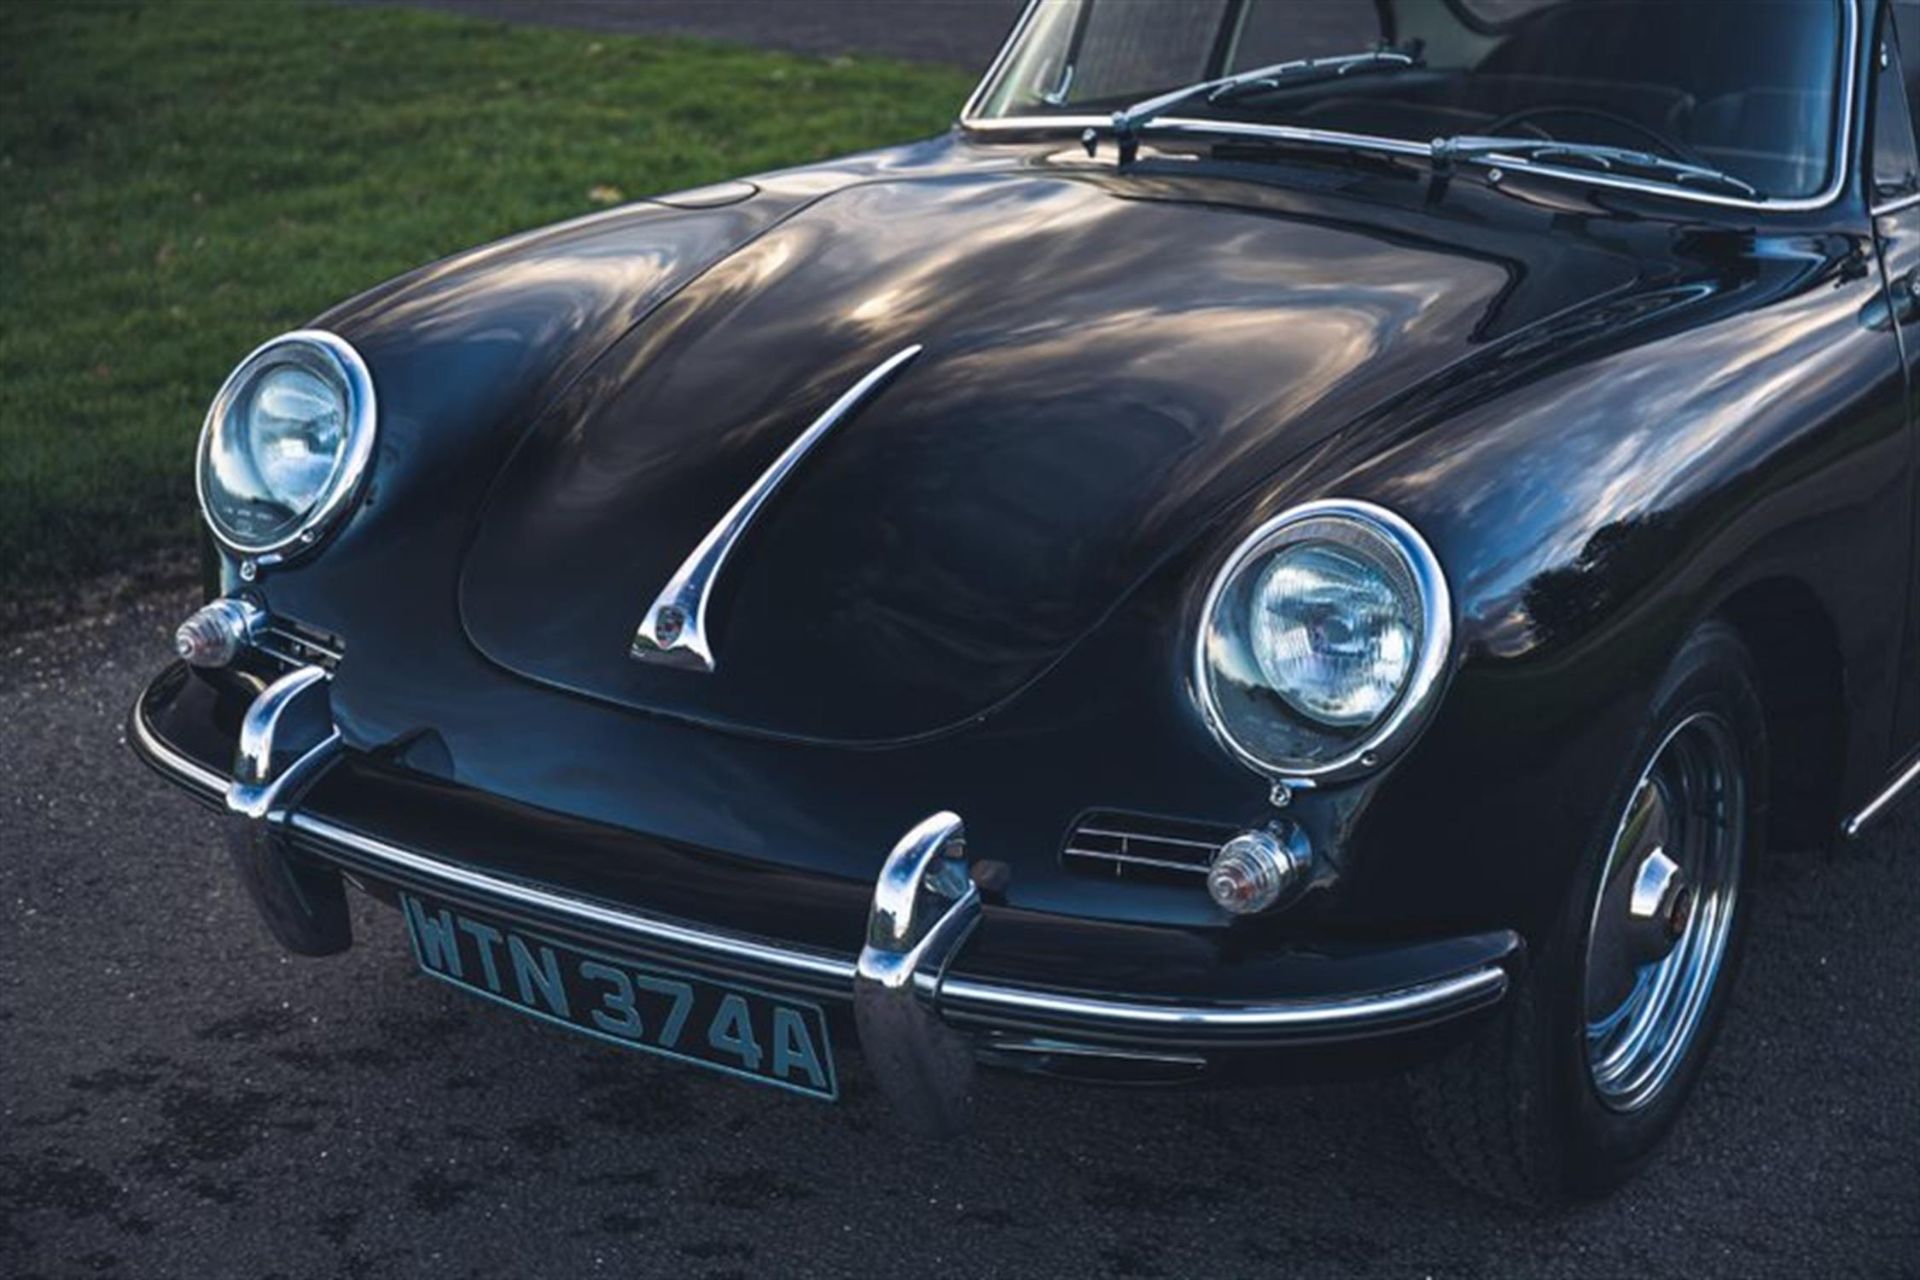 1963 Porsche 356 B T6 Coupe to ‘S’ Specification - Image 8 of 10